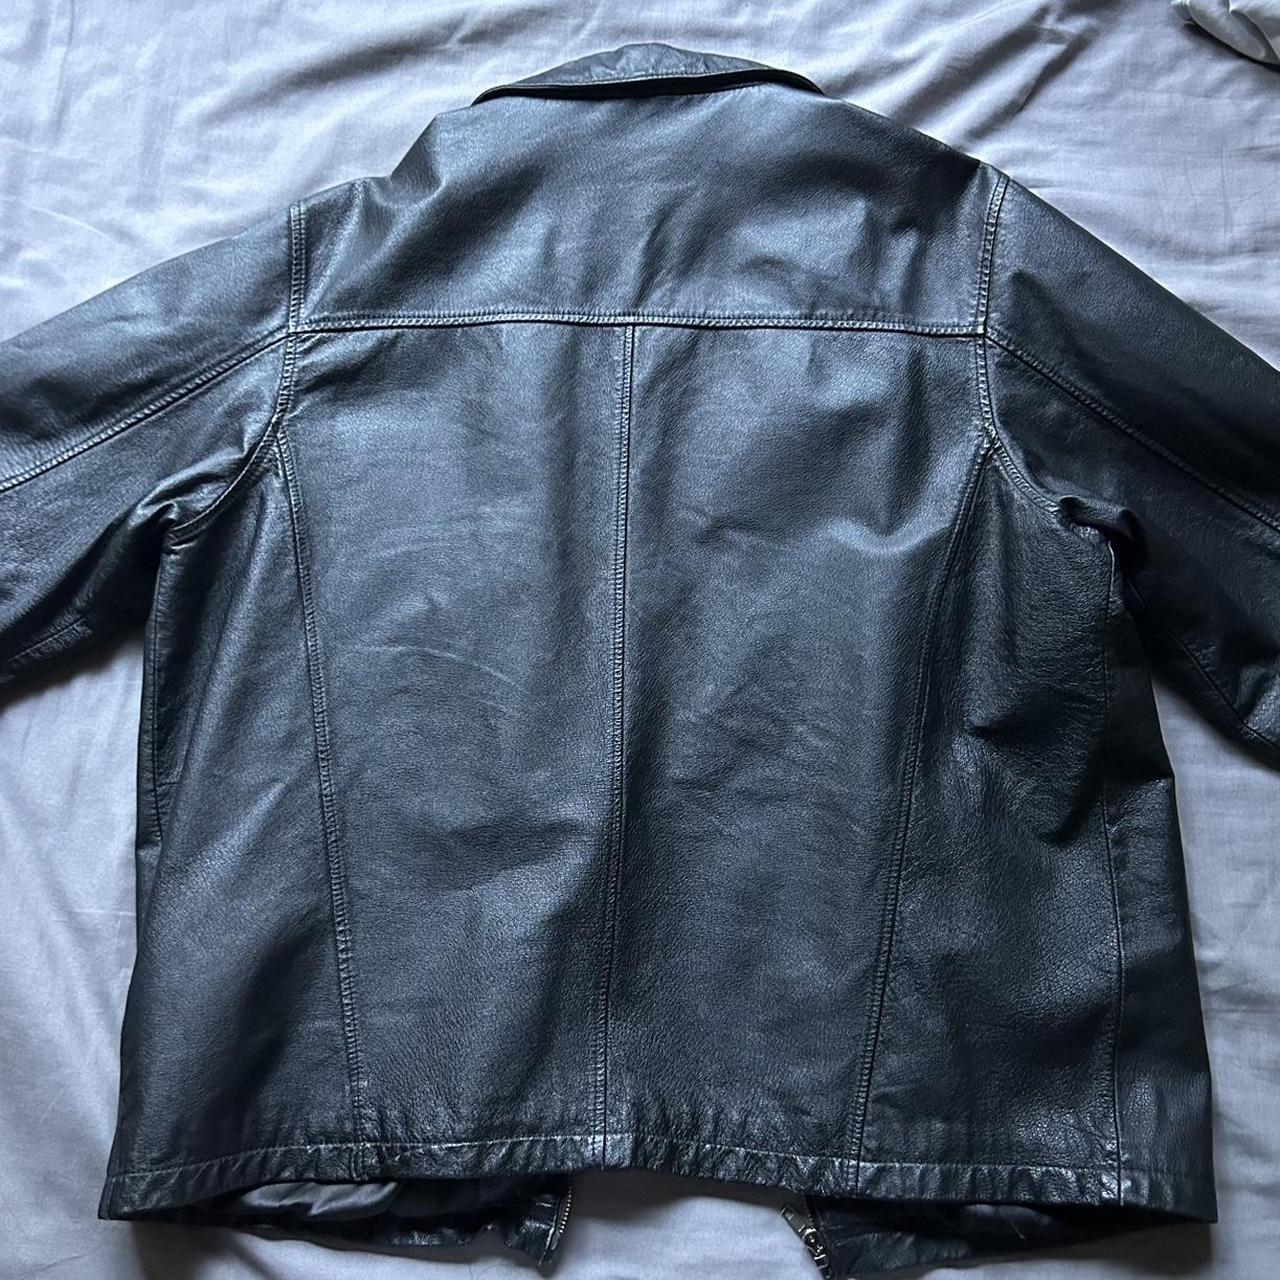 Collared Leather Jacket - Disney Dimensions Leather... - Depop